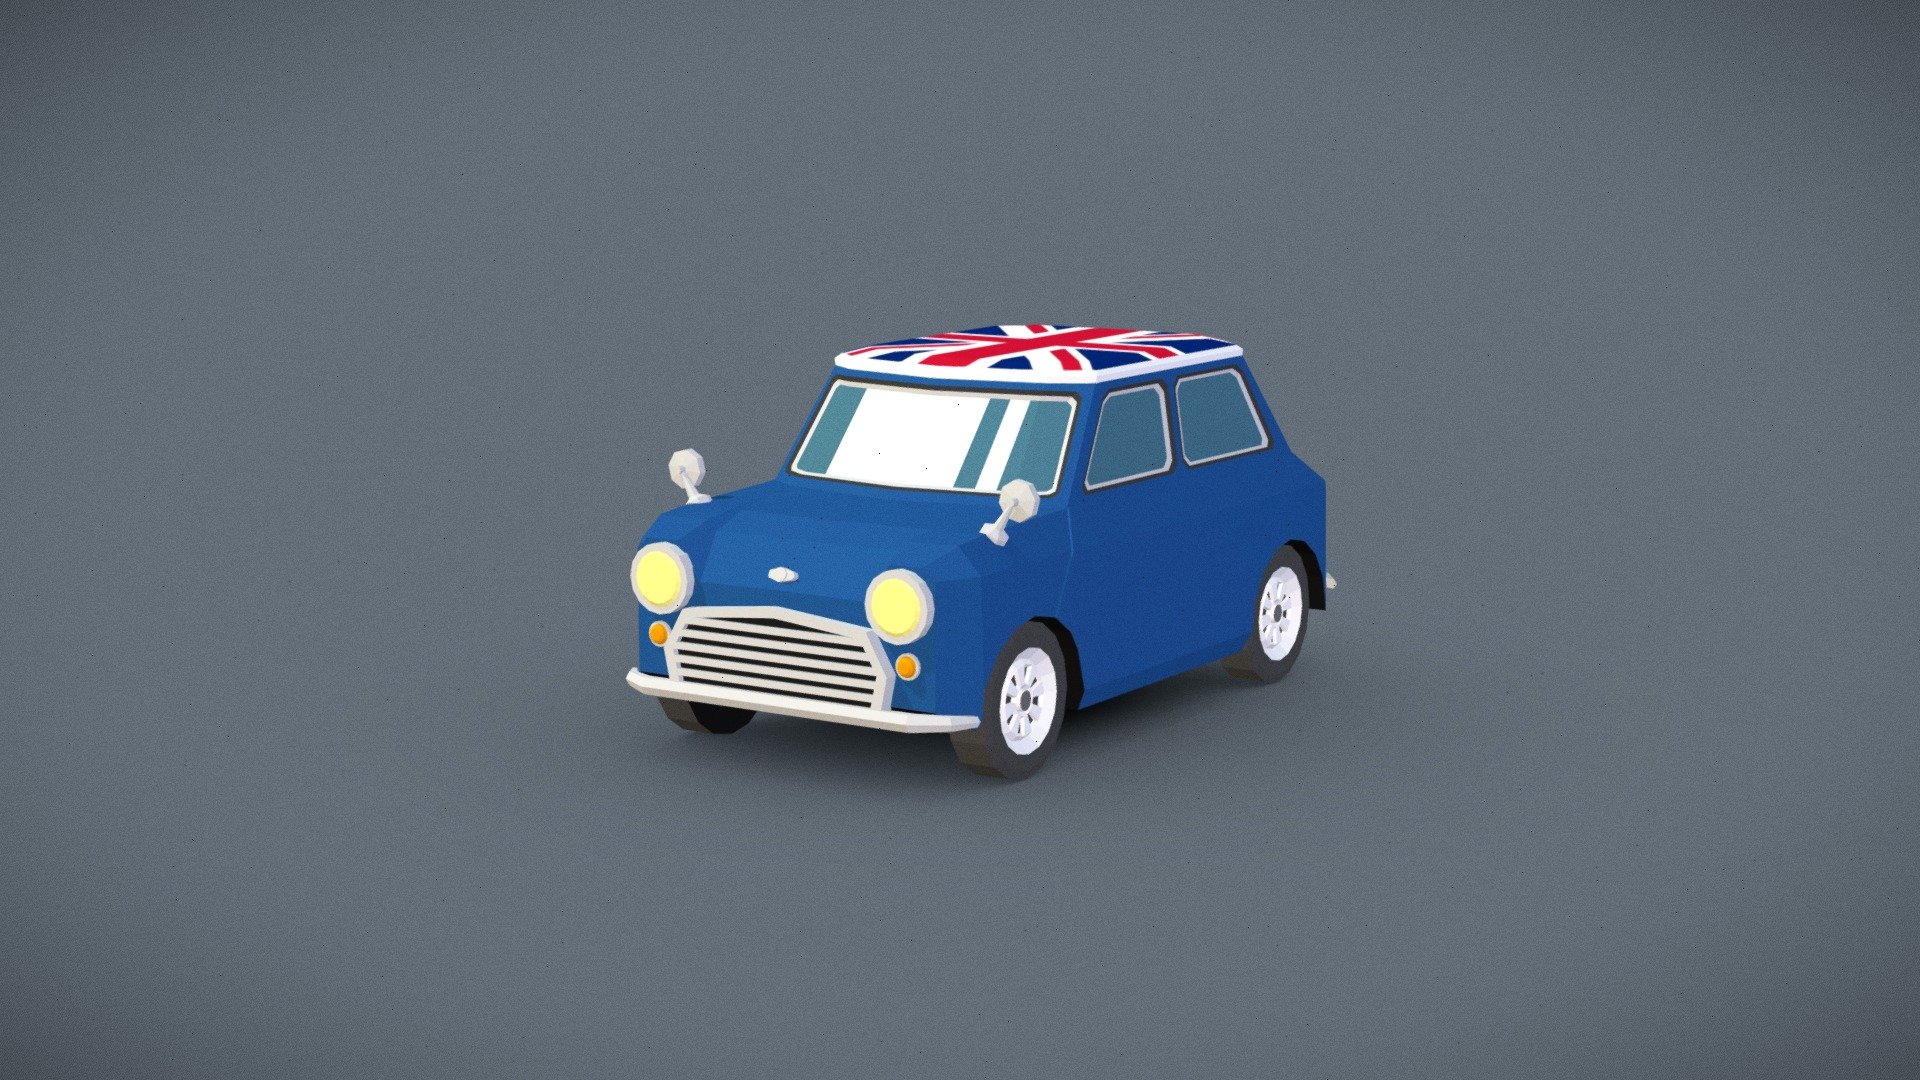 The low poly small classic cartoon car from 1960s in dark blue color with a flag colored roof.

The model is flat shaded low poly colored with a texture. 
Can be easily recolored. 
Optimized for mobile games 3d model